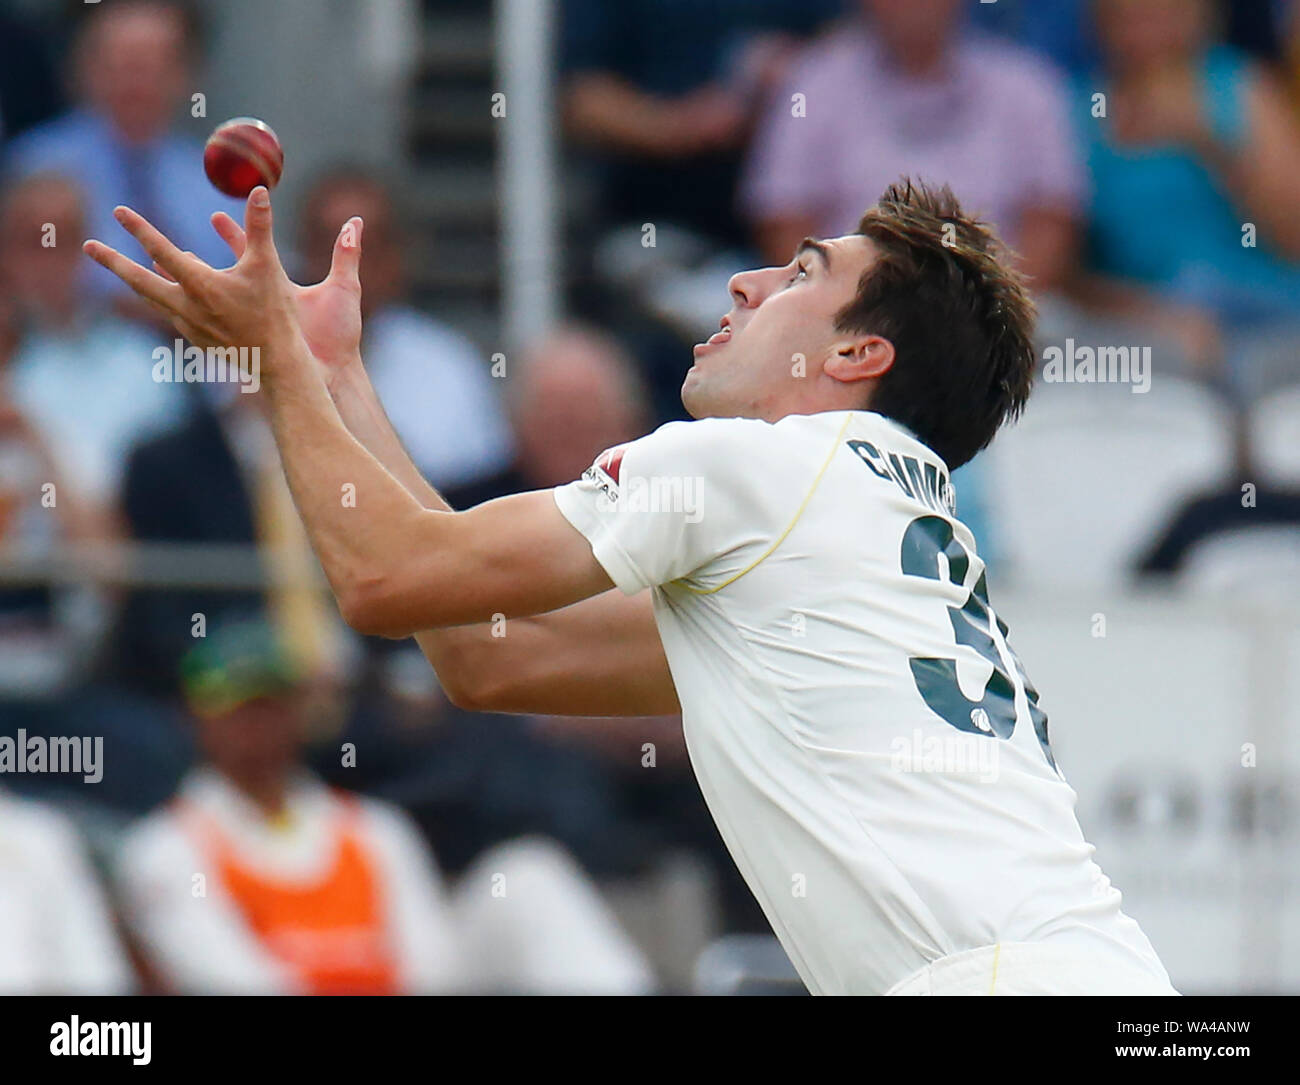 London, UK. 17th Aug, 2019. LONDON, ENGLAND. AUGUST 17: Pat Cummins of Australia caught and bowled Jason Roy of England during play on the 4th day of the second Ashes cricket Test match between England and Australia at Lord's Cricket ground in London, England on August 17, 2019 Credit: Action Foto Sport/Alamy Live News Stock Photo